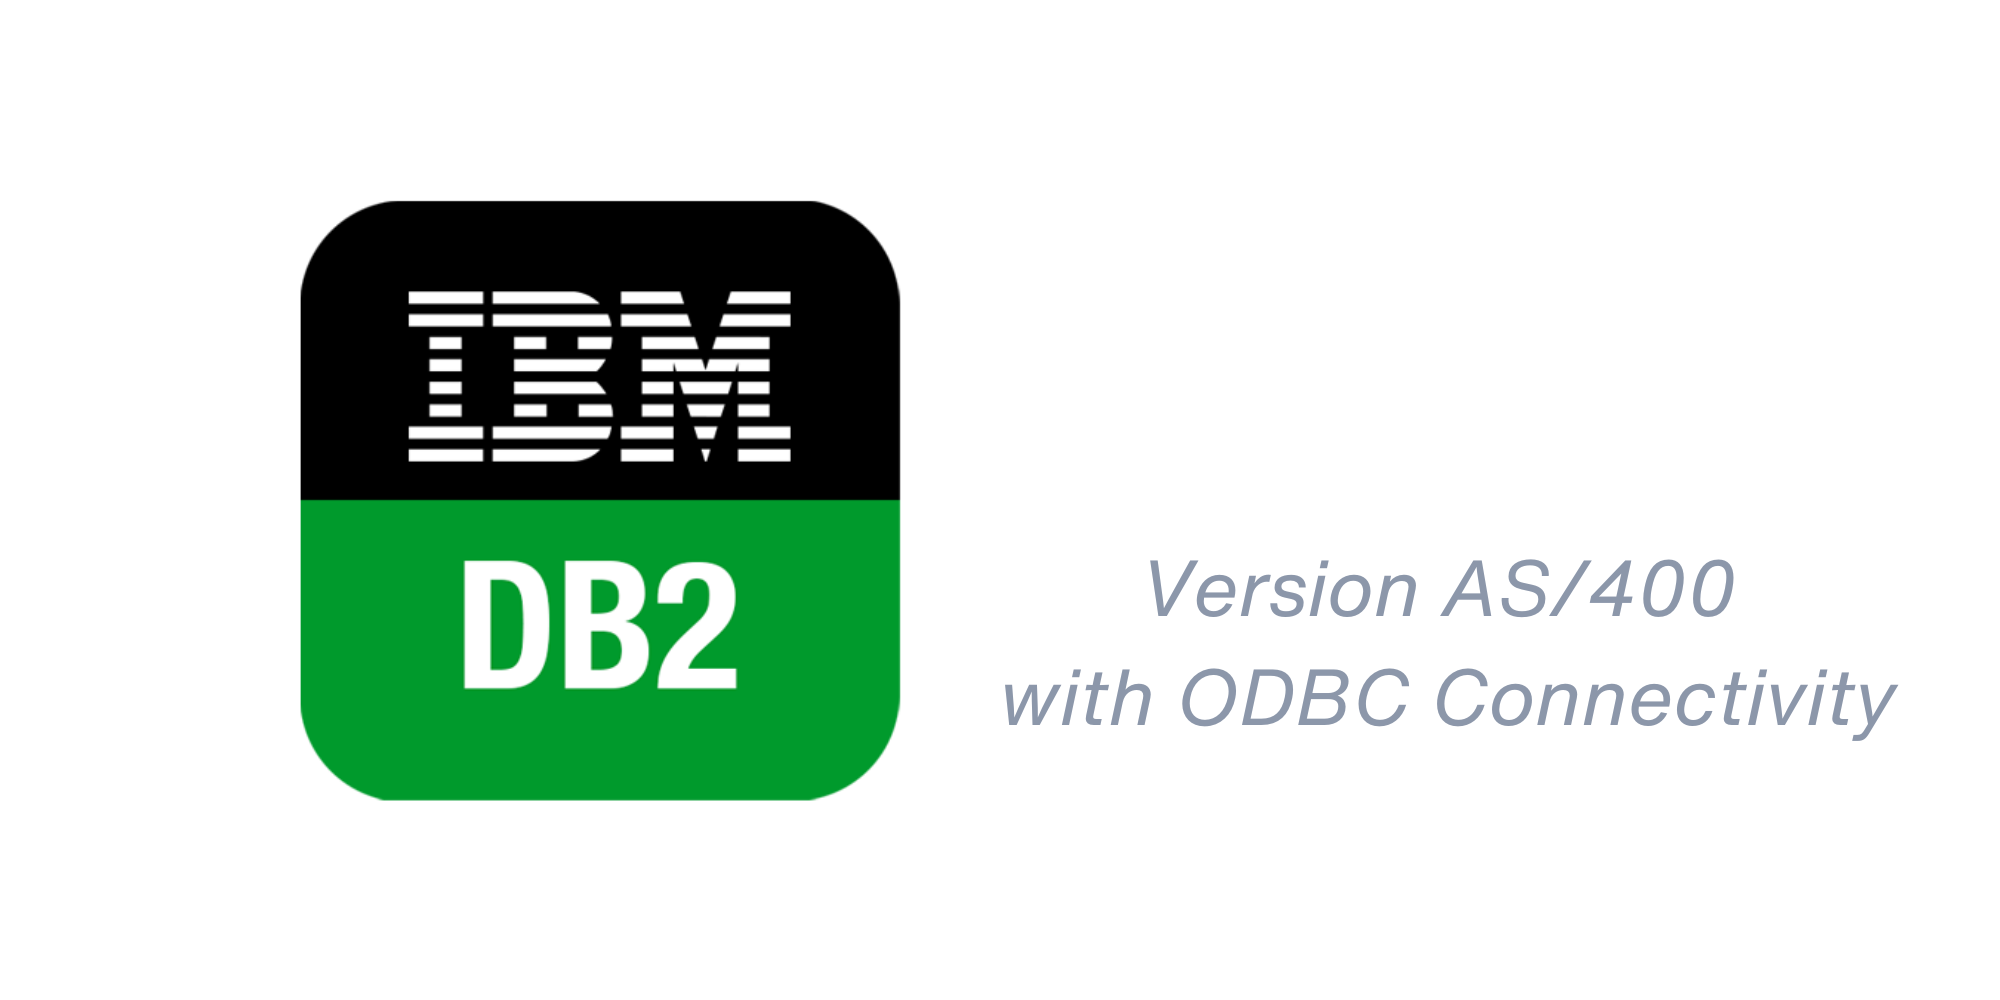 IBM DB2 Version AS/400 with ODBC Connectivity  Headshot